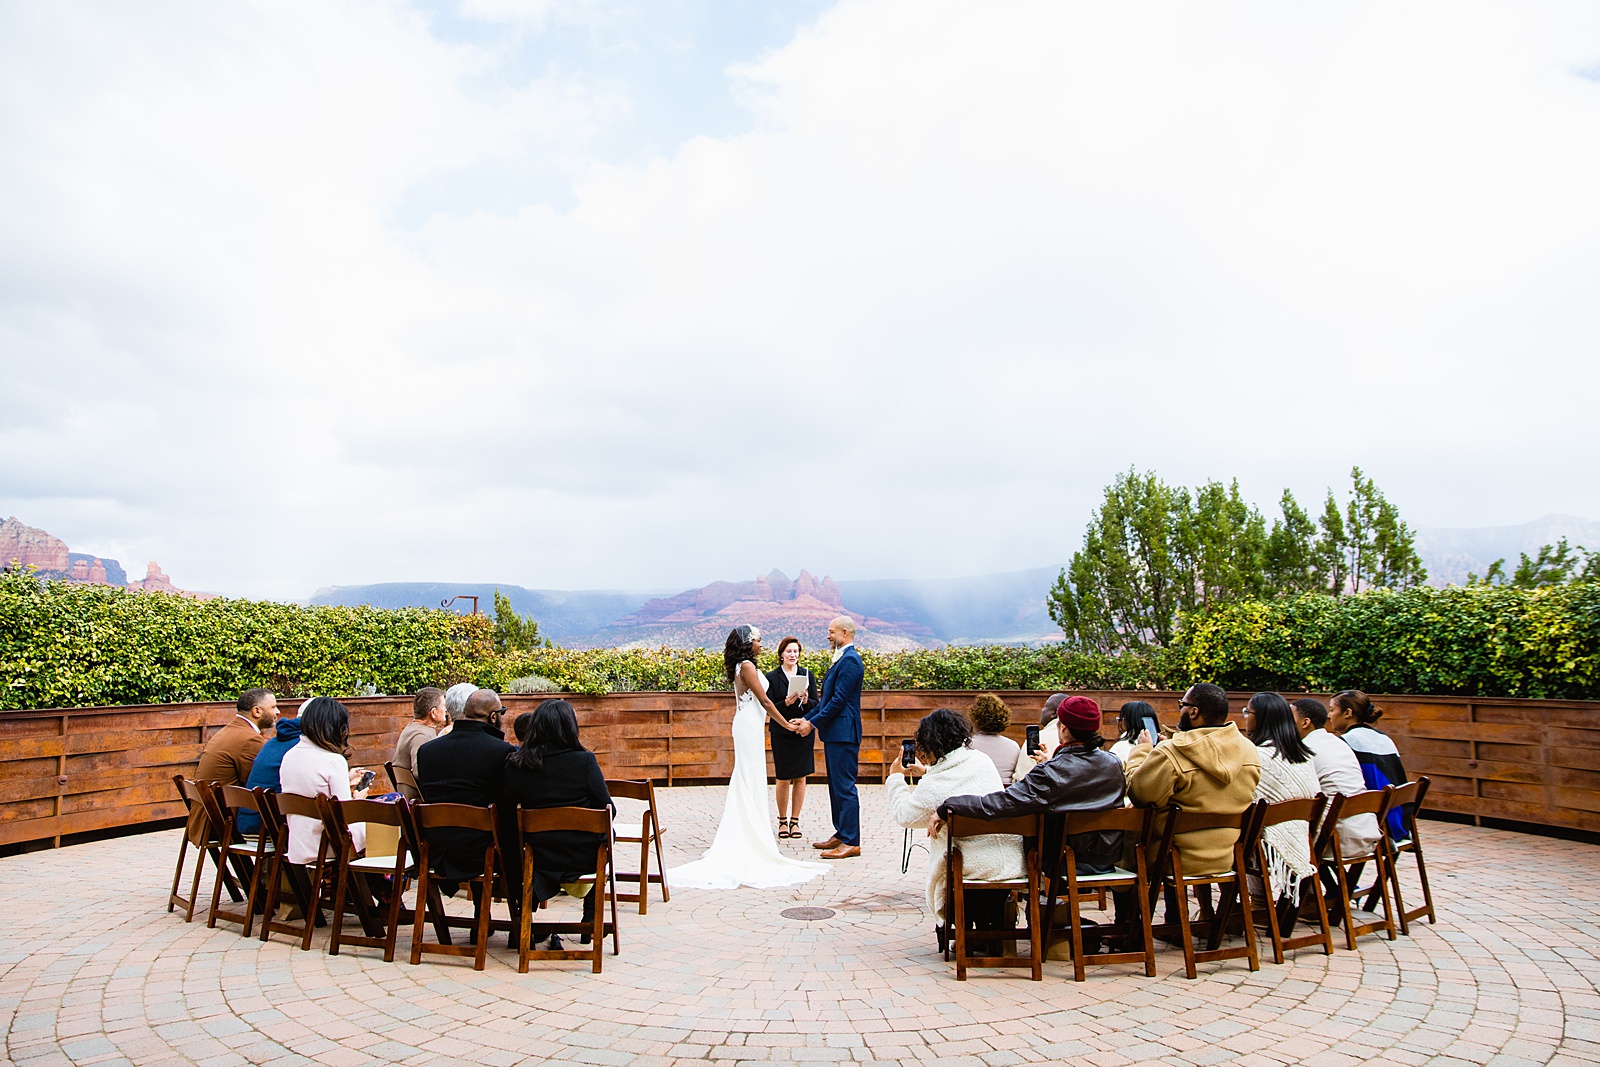 A micro wedding ceremony at Agave of Sedona by Arizona micro wedding photographer PMA Photography.